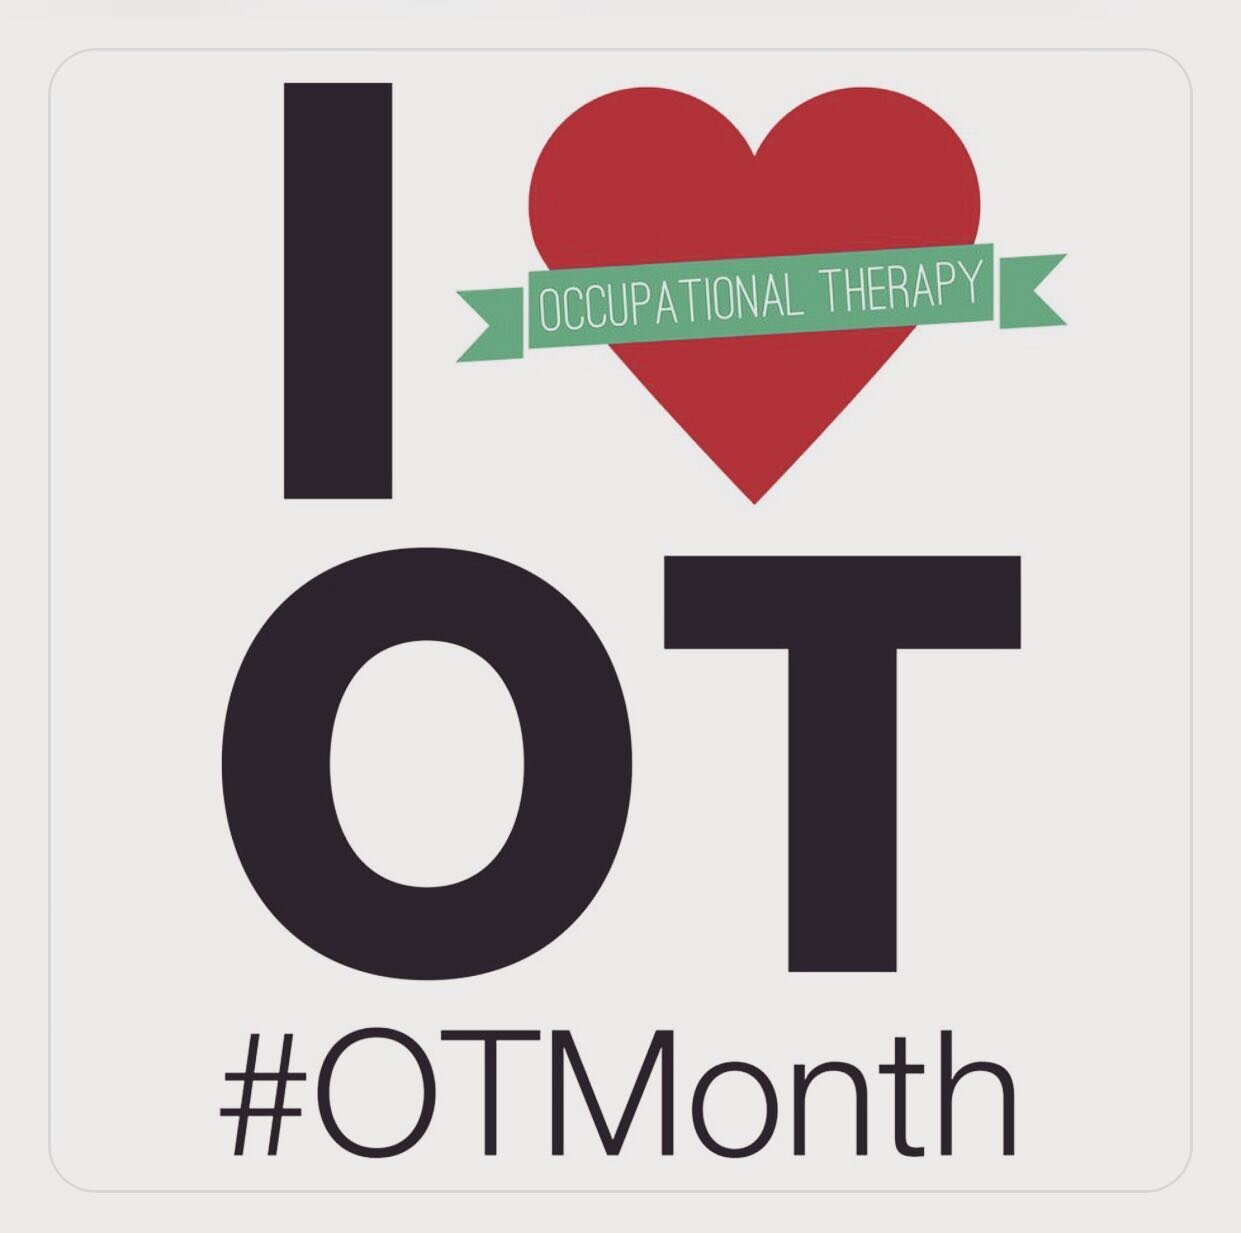 April is Occupational Therapy month! I am so grateful to bring this unique perspective into my practice as a pelvic floor therapist. Most people associate pelvic health with PTs and are often surprised to find that I am an OT. As an OT, I employ a wh